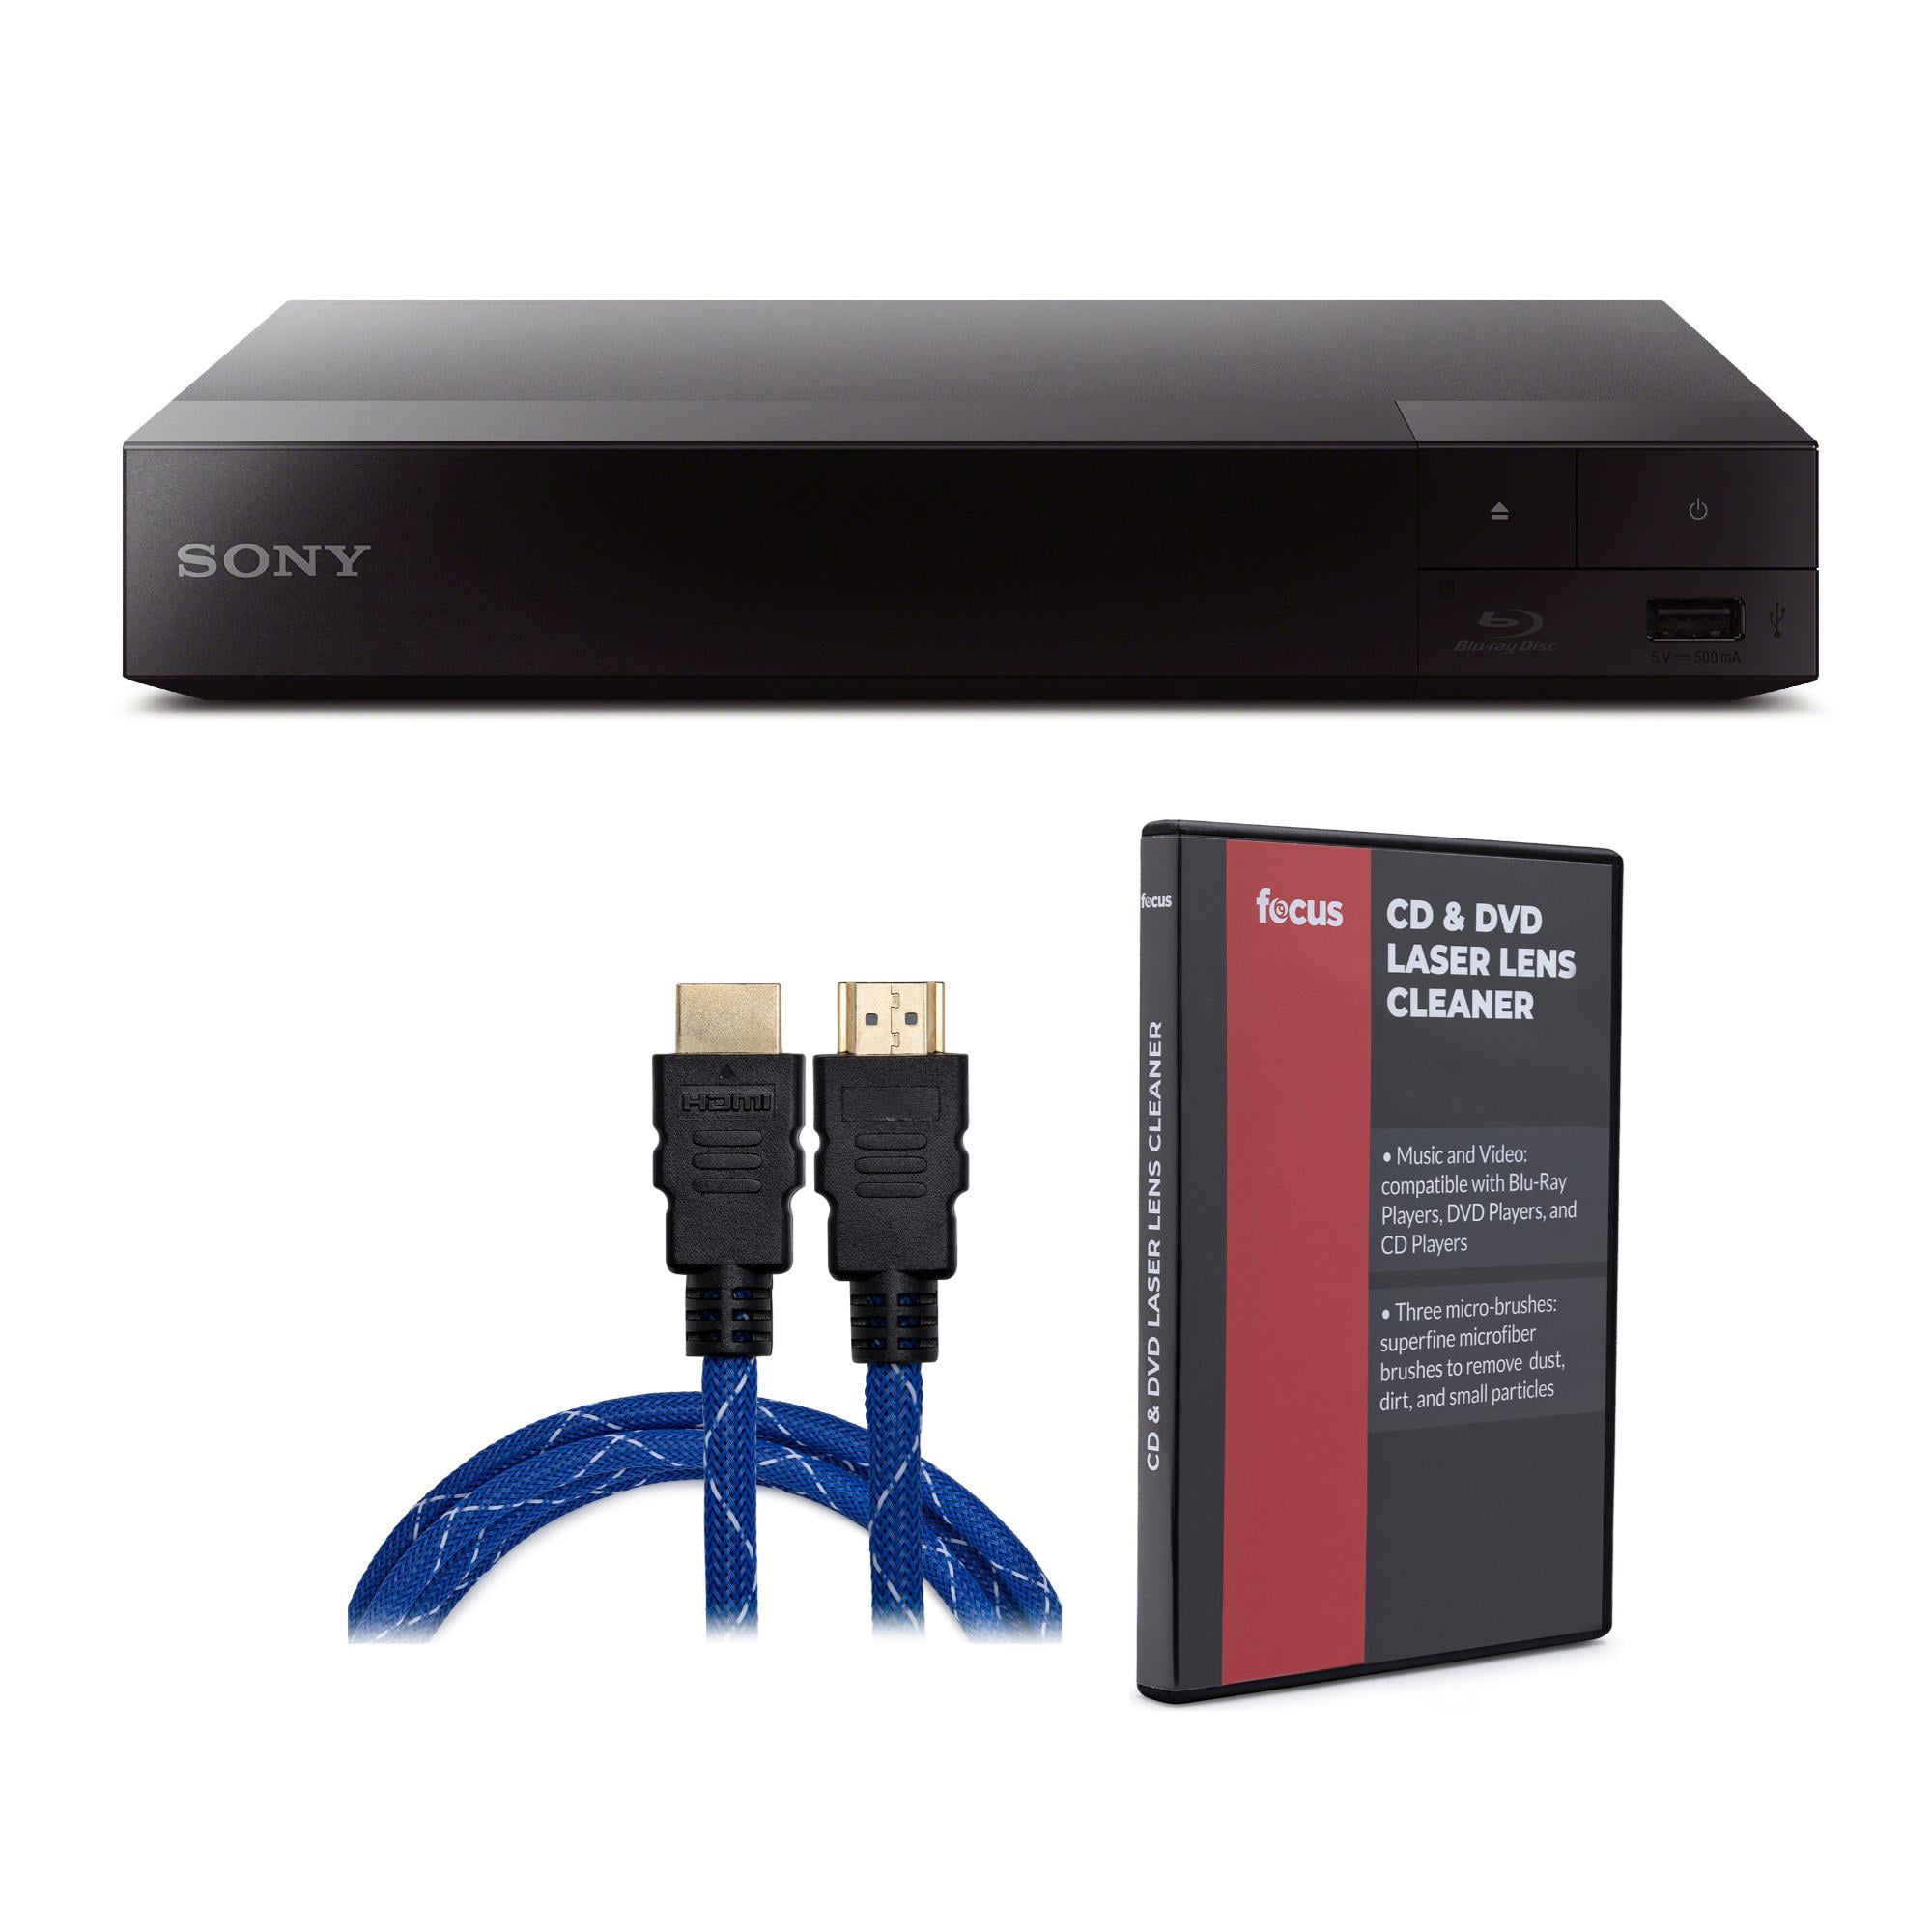 Sony BDPS1700 Blu-ray Disc Player with Web Streaming Bundle with Accessories